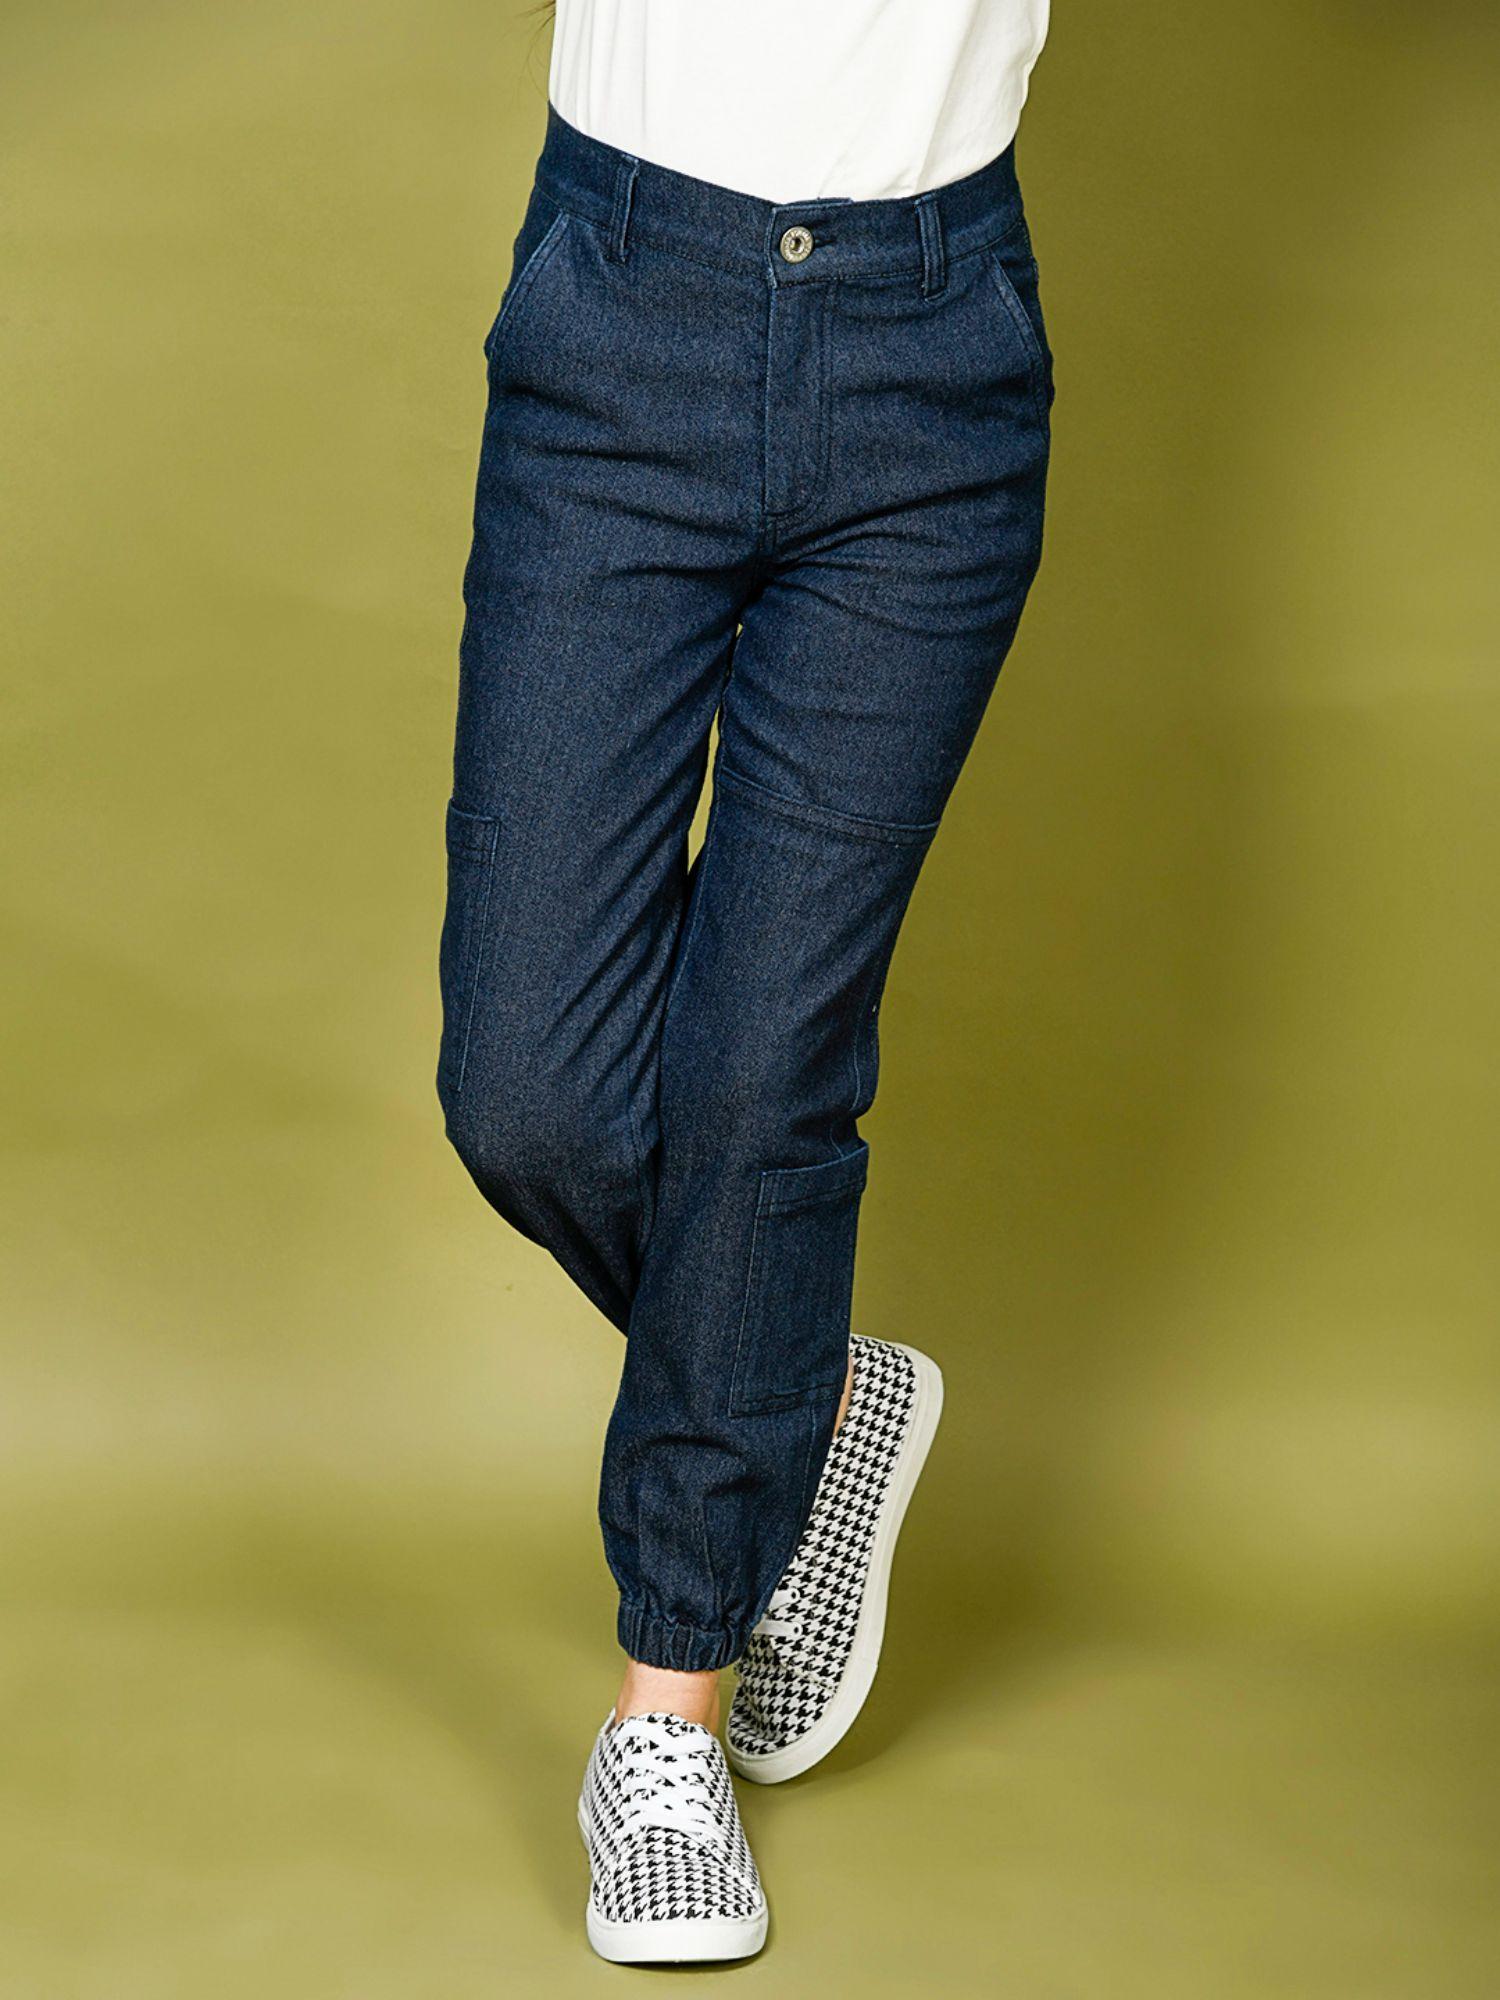 navy blue solid joggers style denim jeans pant